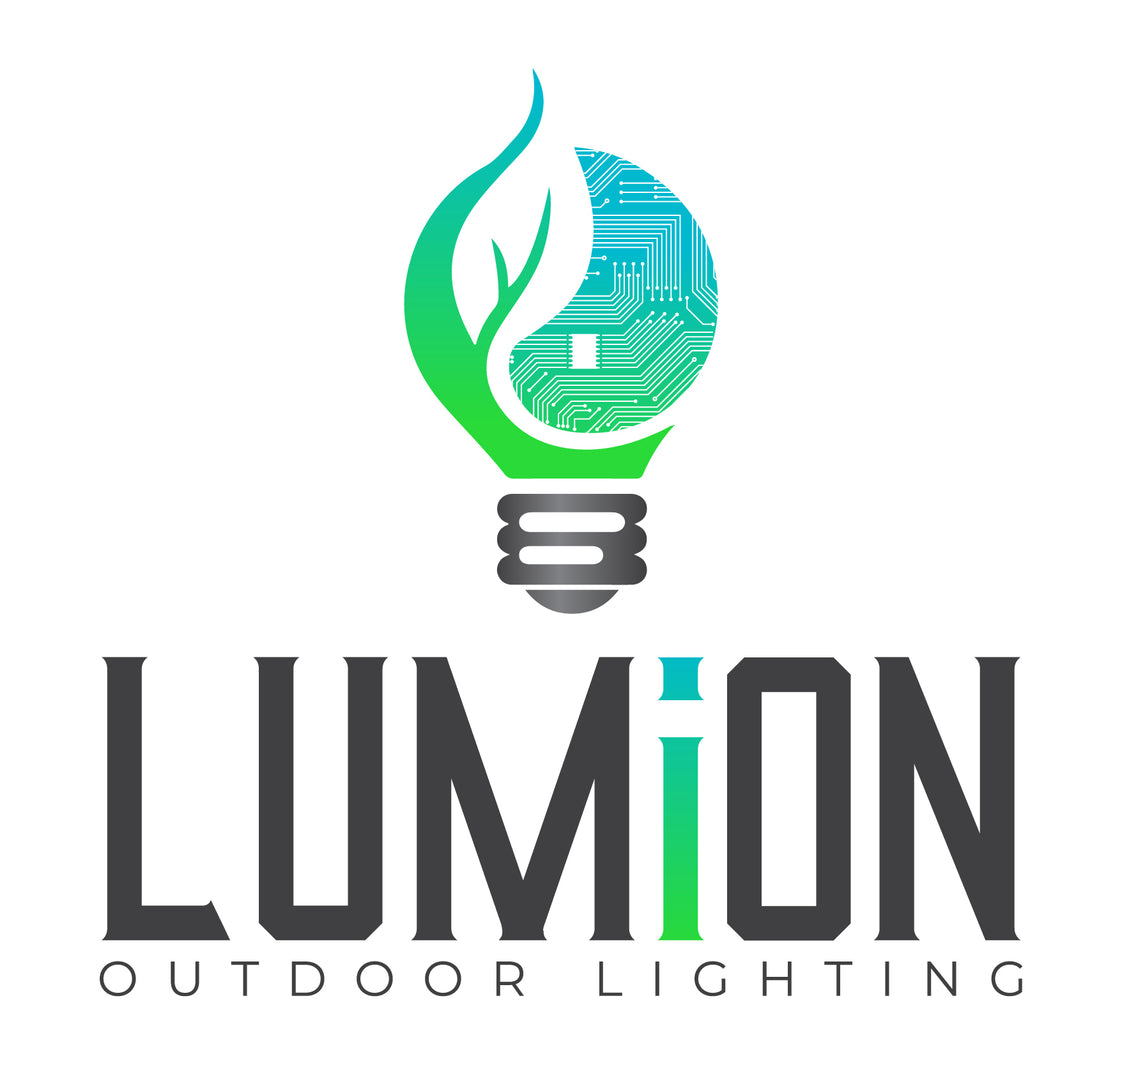 LUMiON Outdoor Lighting Merges with Structure & Tree